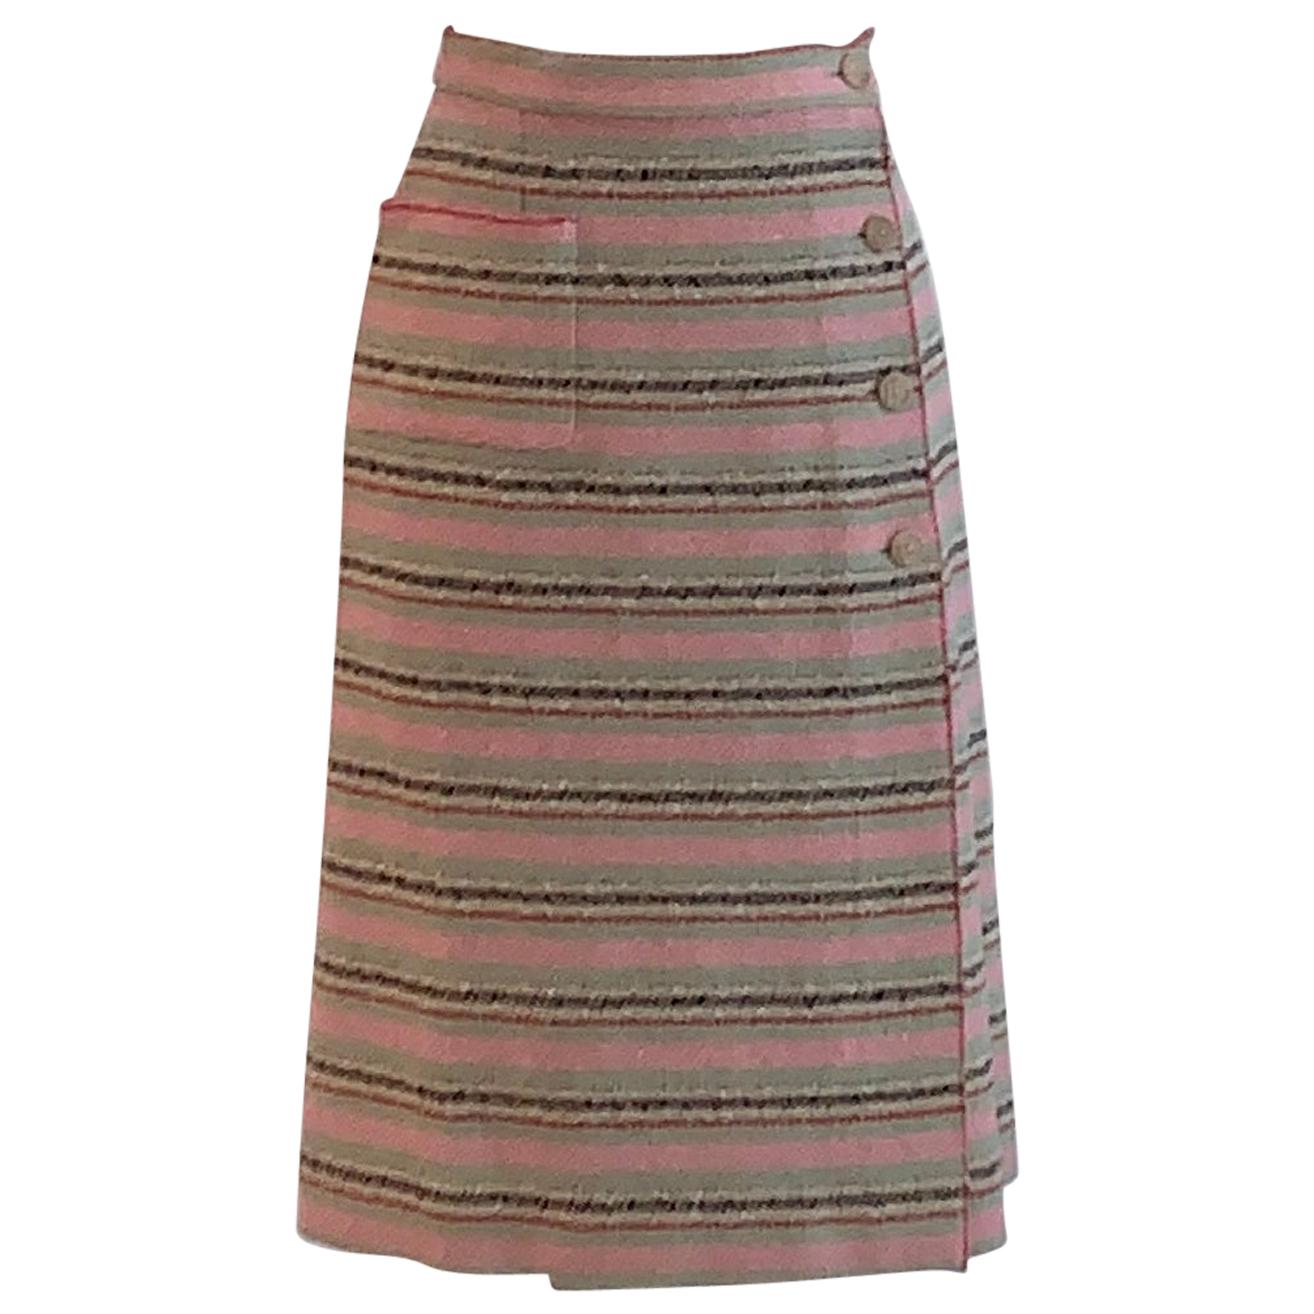 Chanel 2000 Cruise Collection Pink, Green, Natural, Red Stripe Pencil Skirt